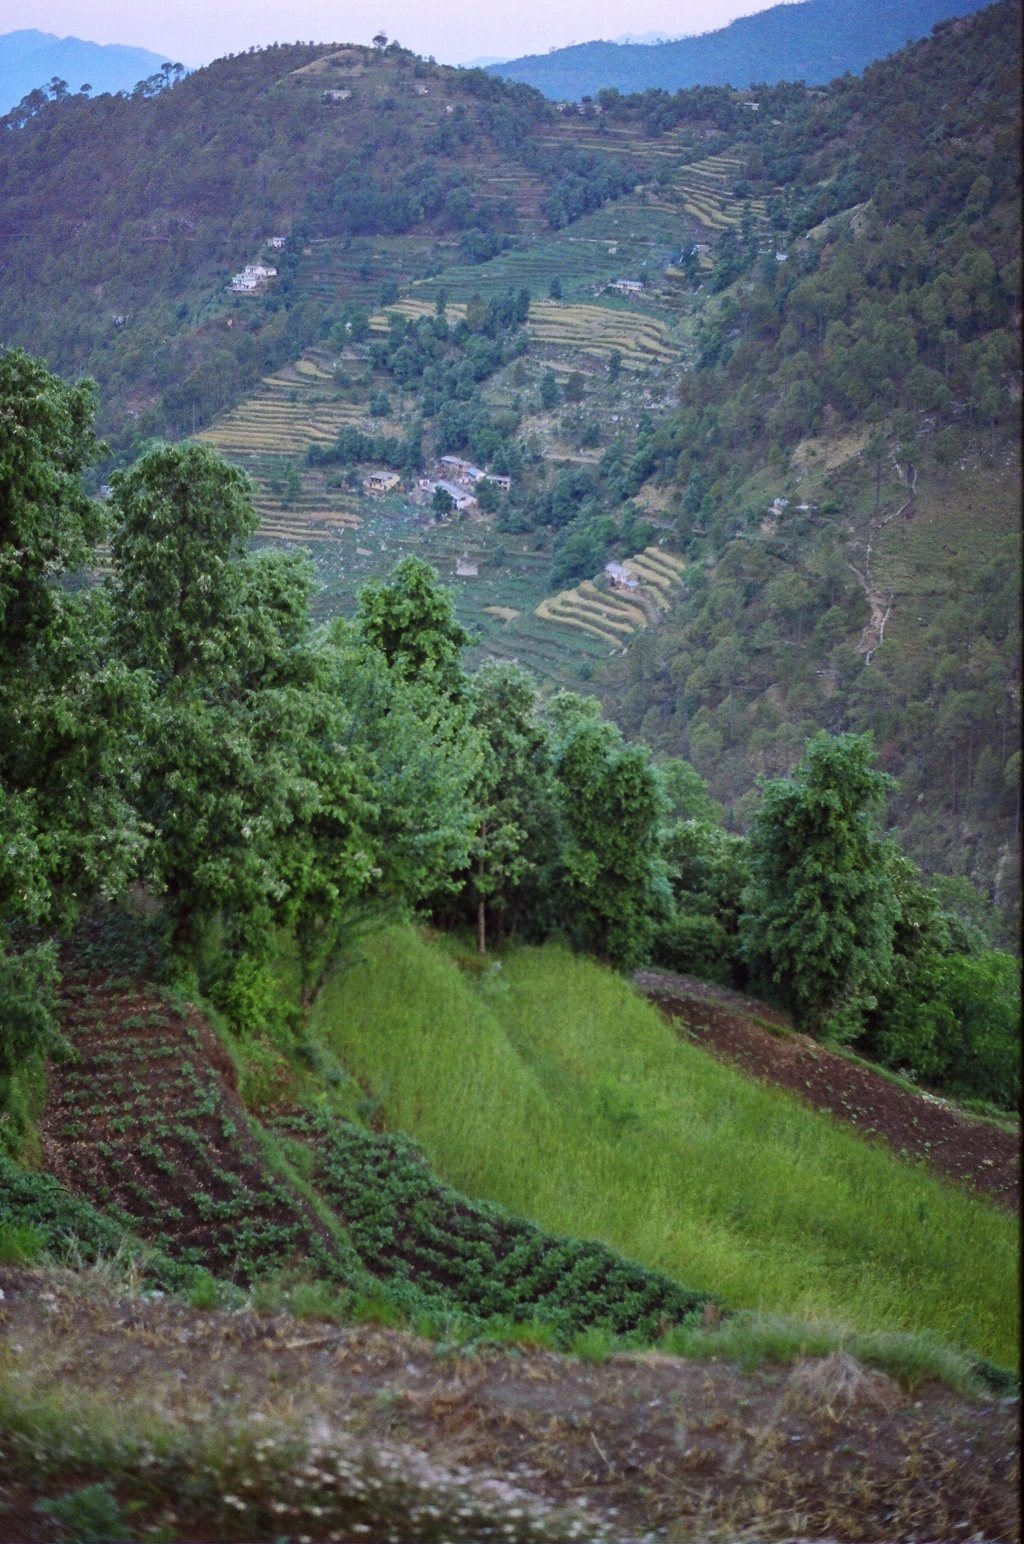 hilly farmland near a mountain covered with trees